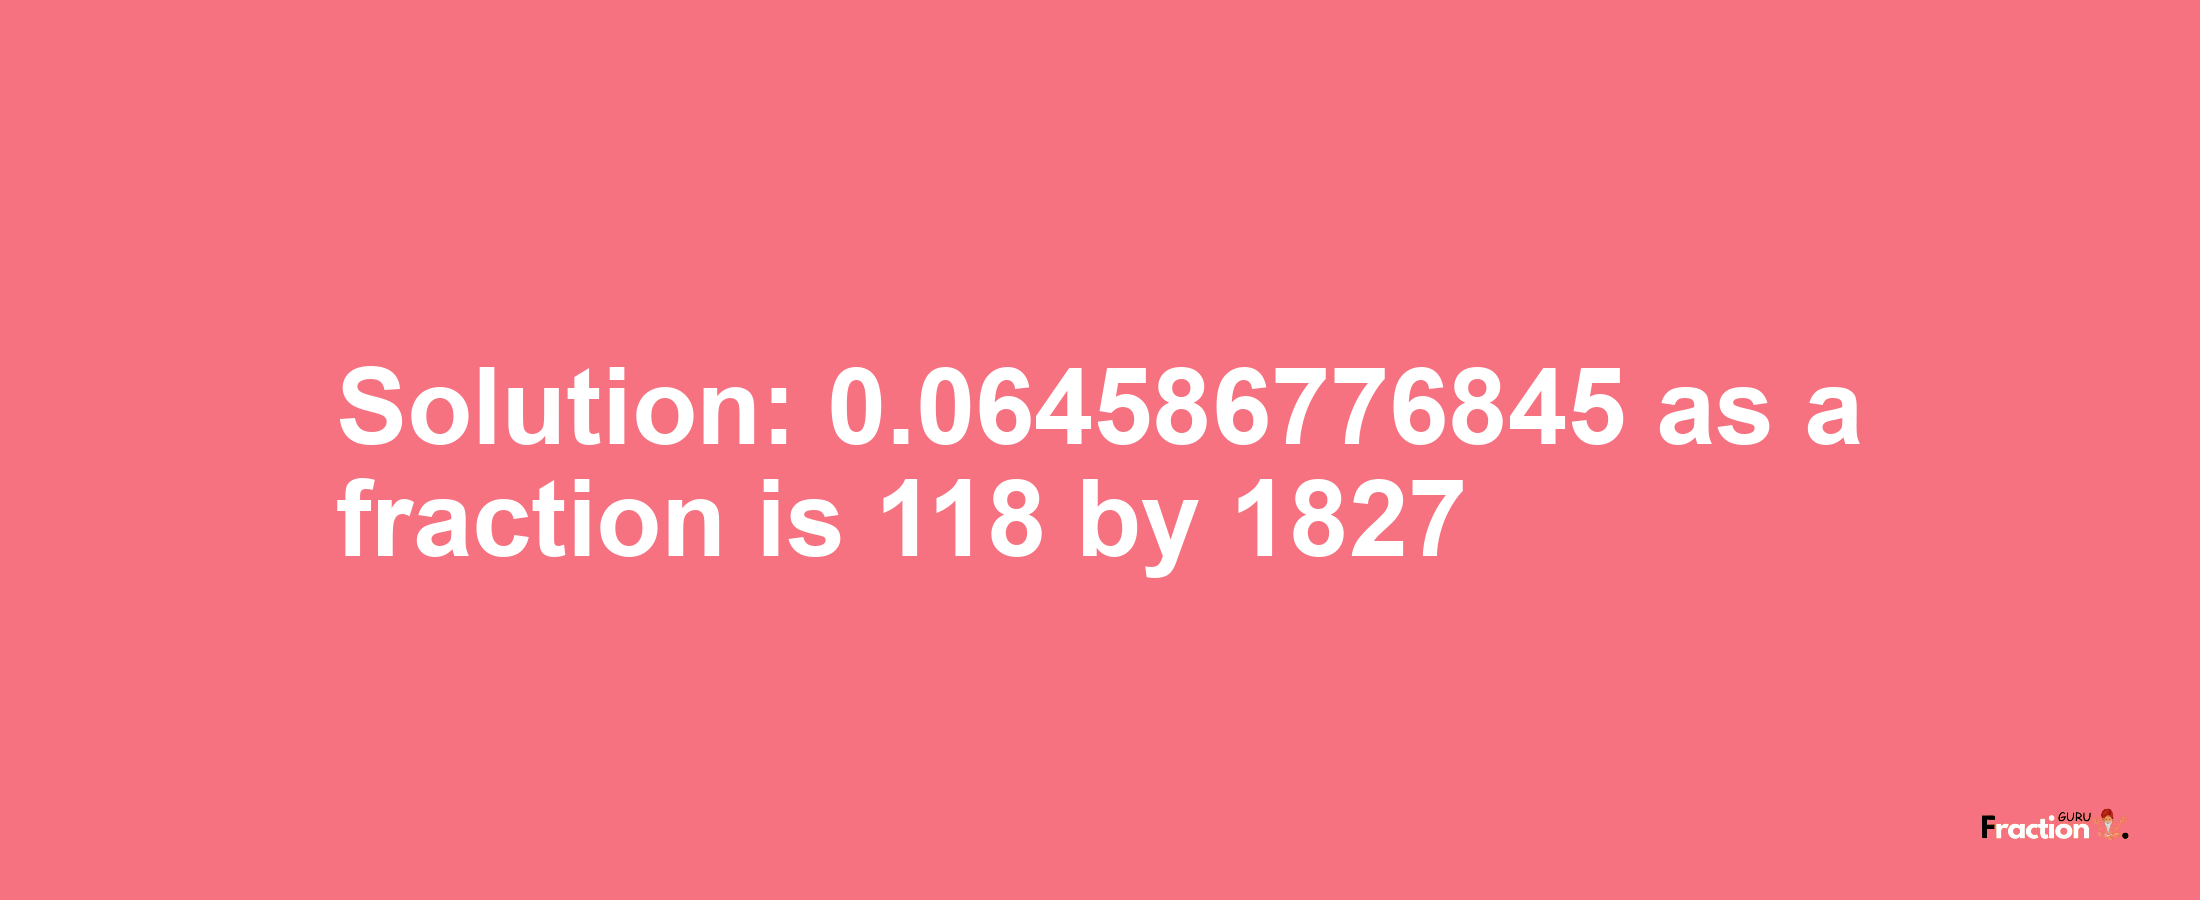 Solution:0.064586776845 as a fraction is 118/1827